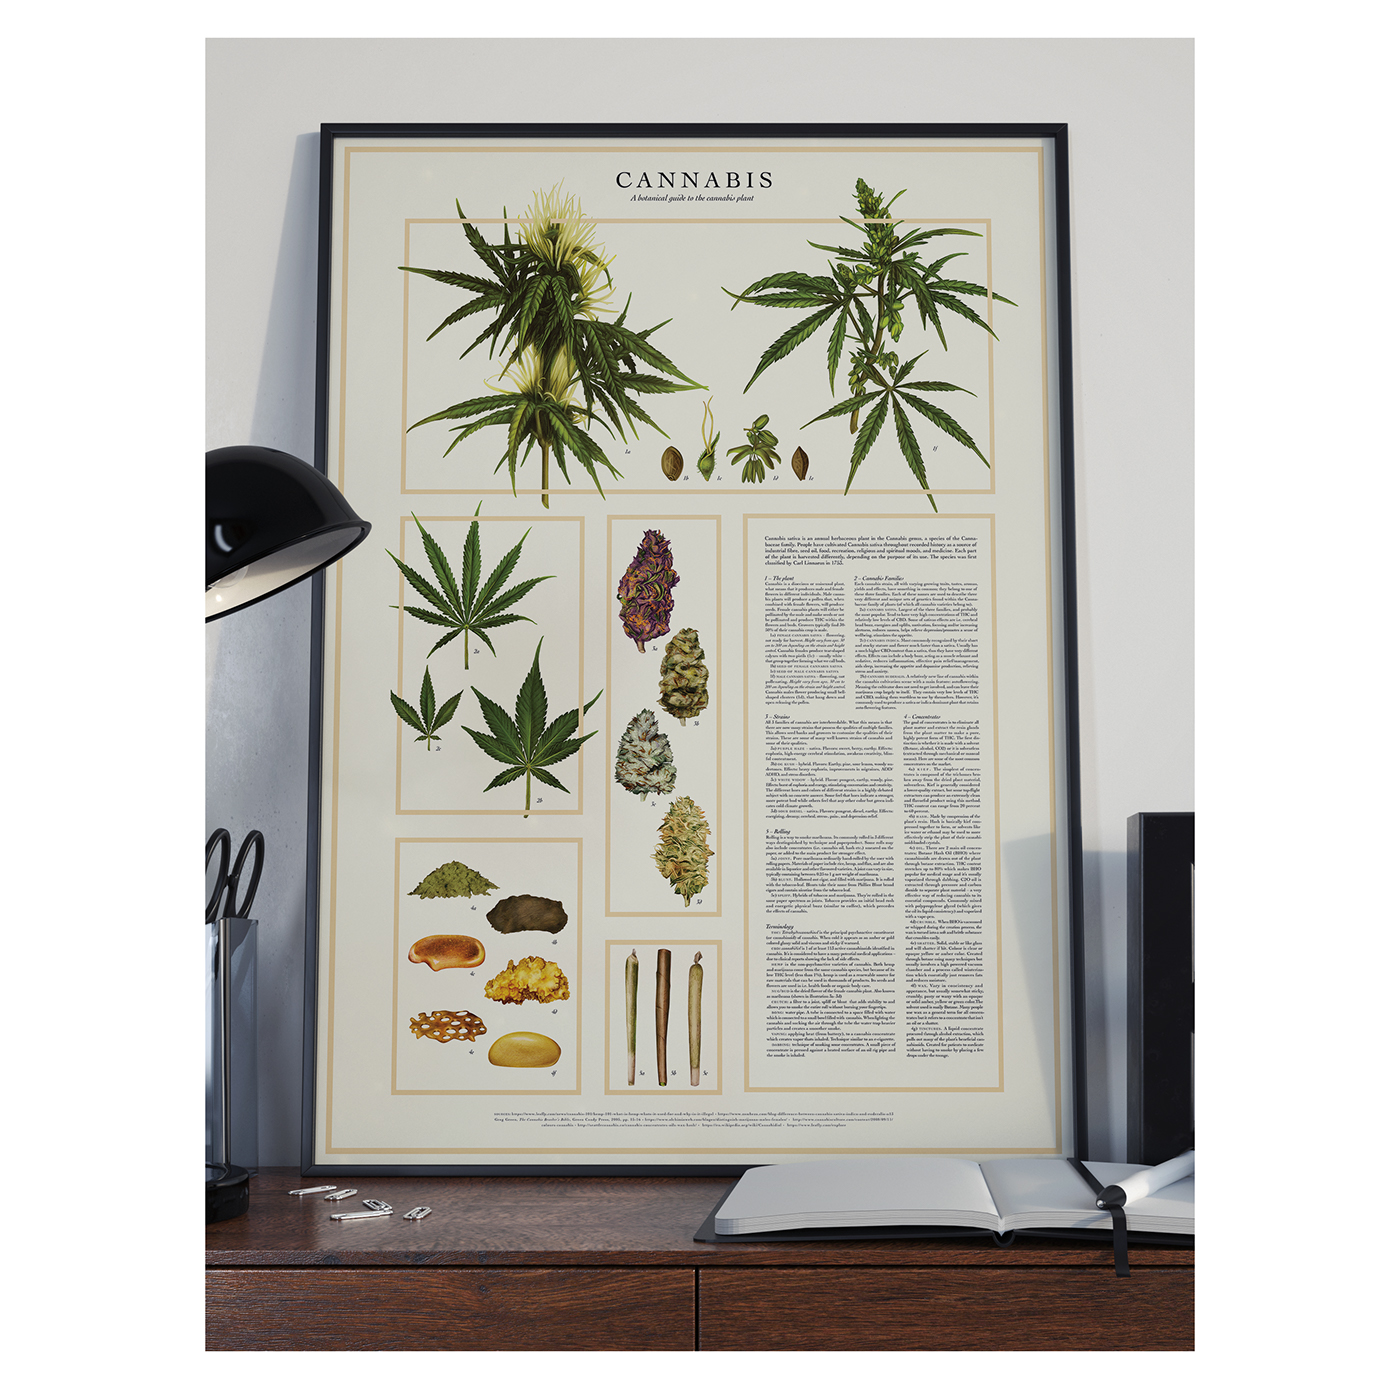 cannabis weed marijuana infographic botanical plate botany flower floral handprint strains sativa indica concentrates